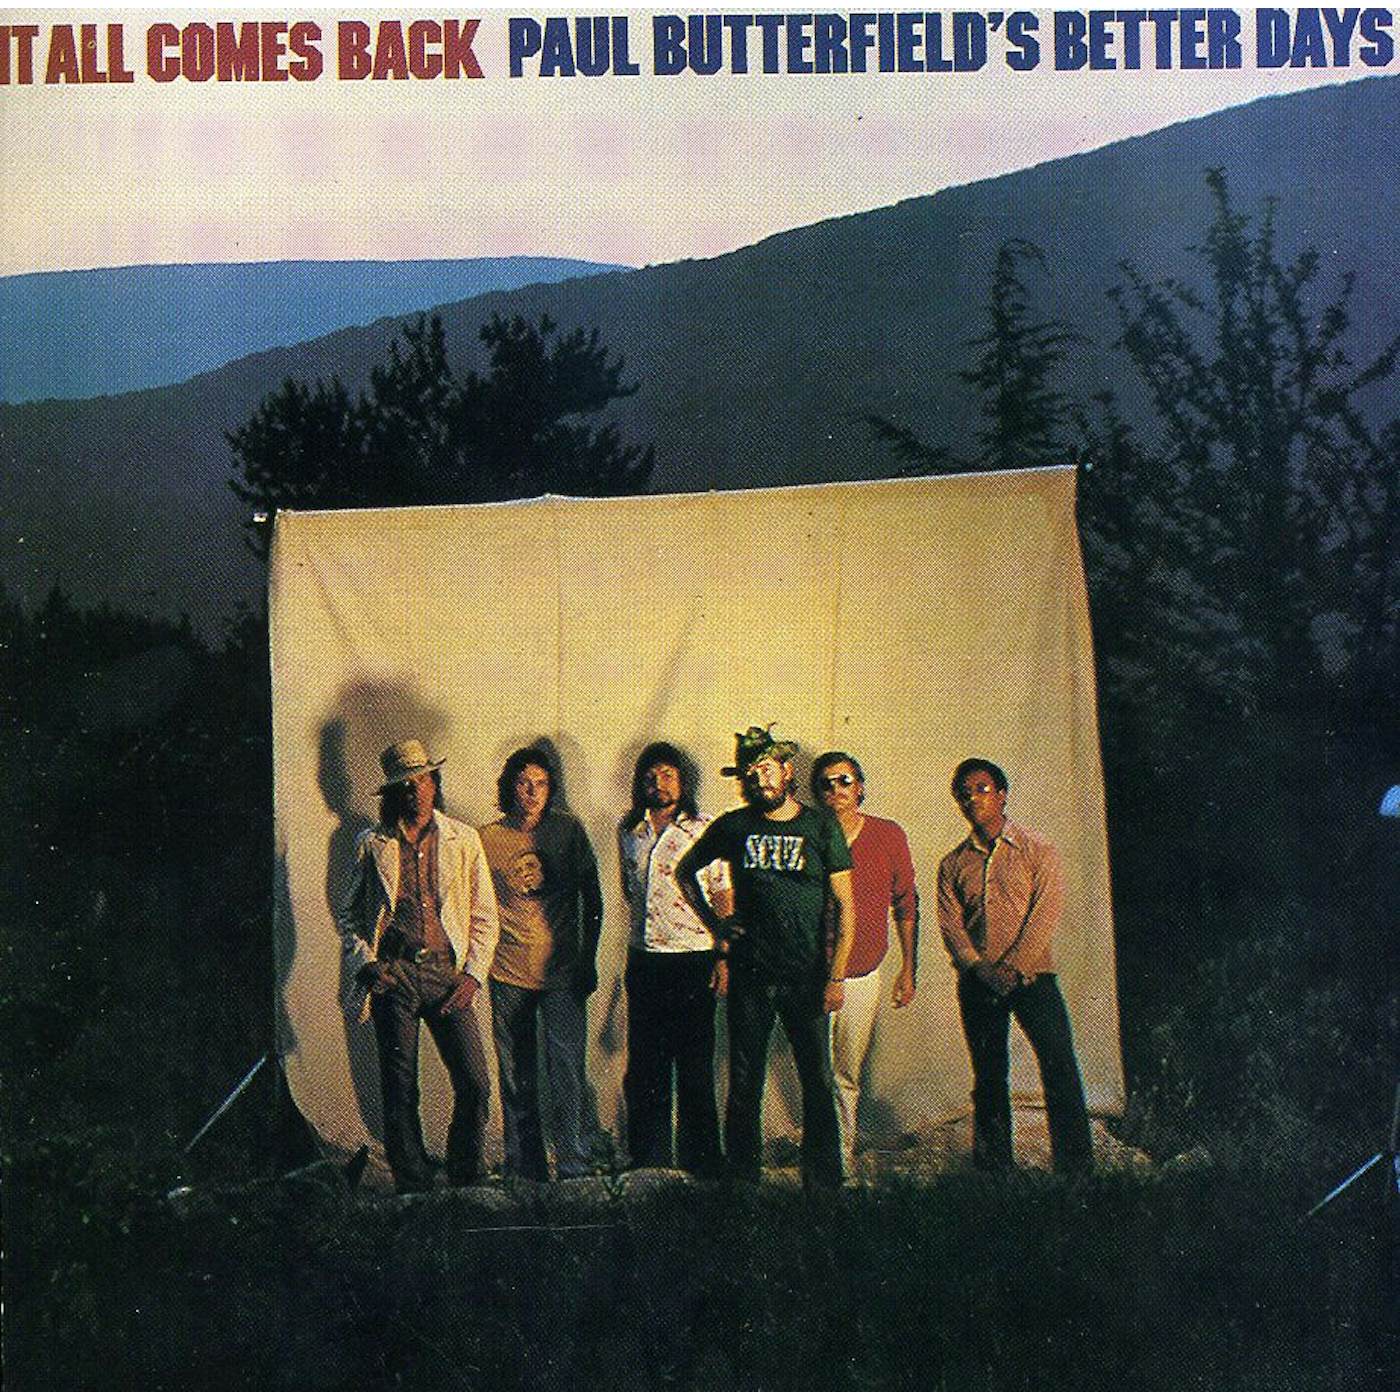 Paul Butterfield IT ALL COMES BACK CD